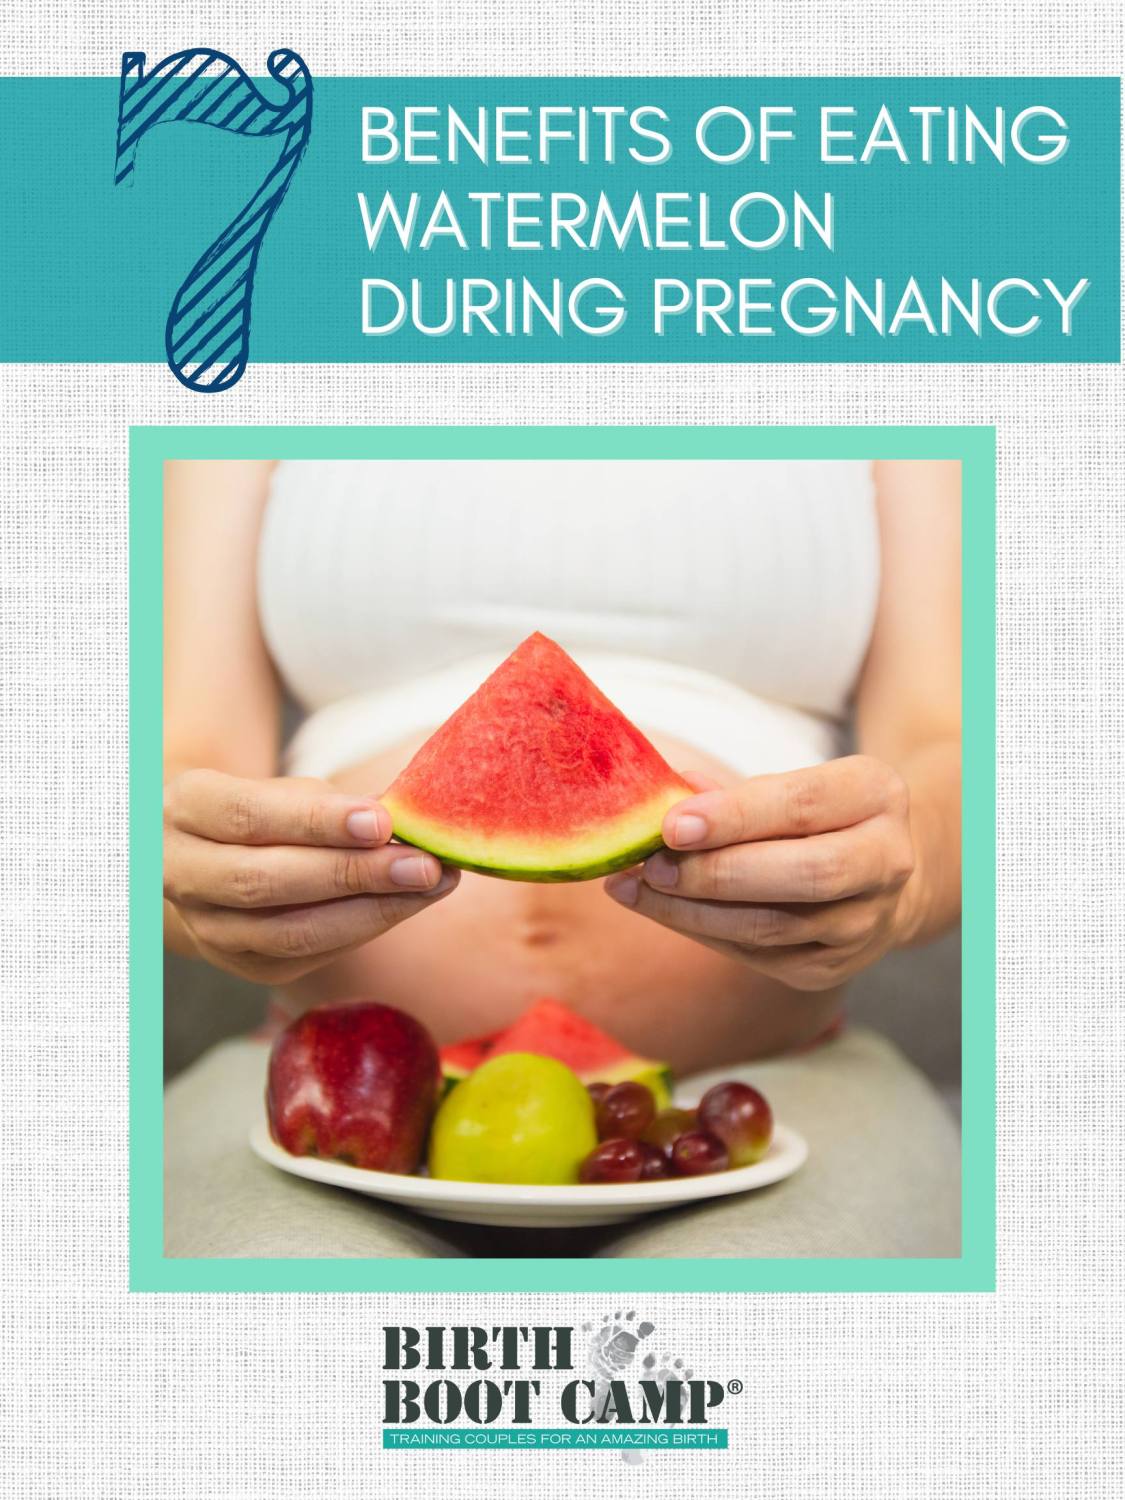 7 Juicy Benefits of Eating Watermelon During Pregnancy